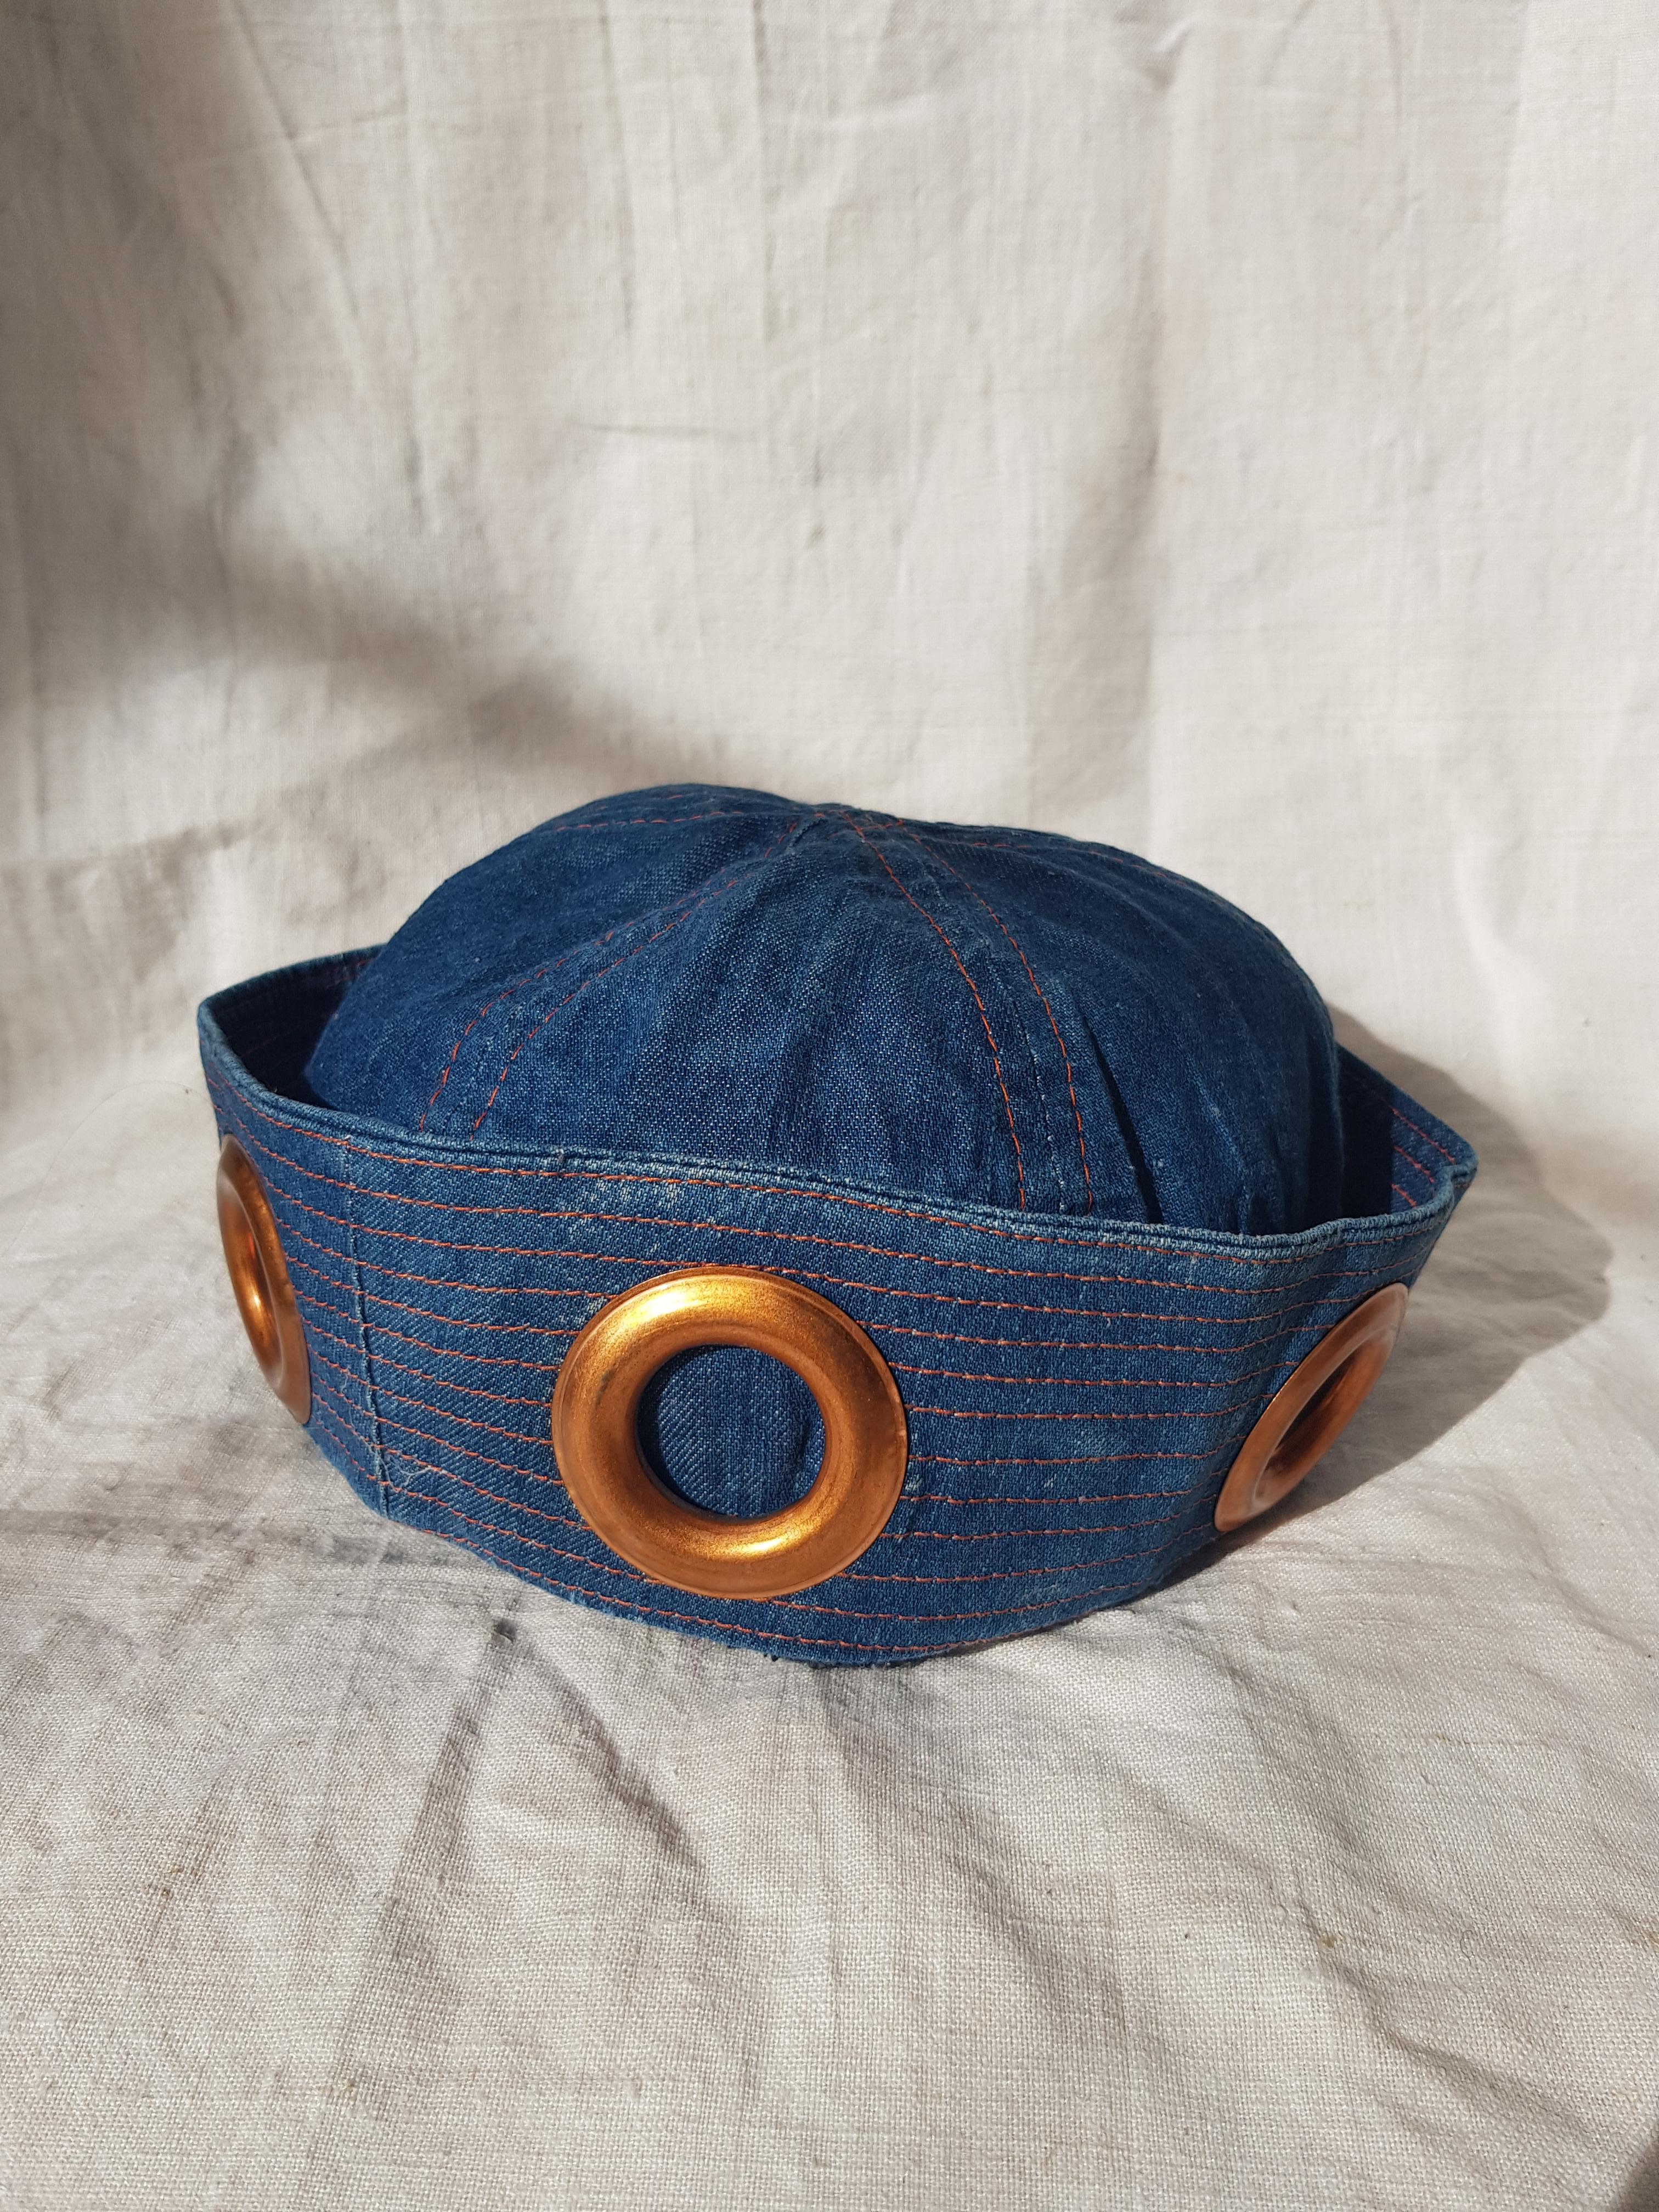 Iconic piece of Jean Paul Gaultier Jean's, a classic and rare denim sailor hat coming directly from the 90s.

-Denim
-Circa 1985/1995
-Metal copper rings
-JPGJean's labelled
-Size U, fits until 58cm head circumference.